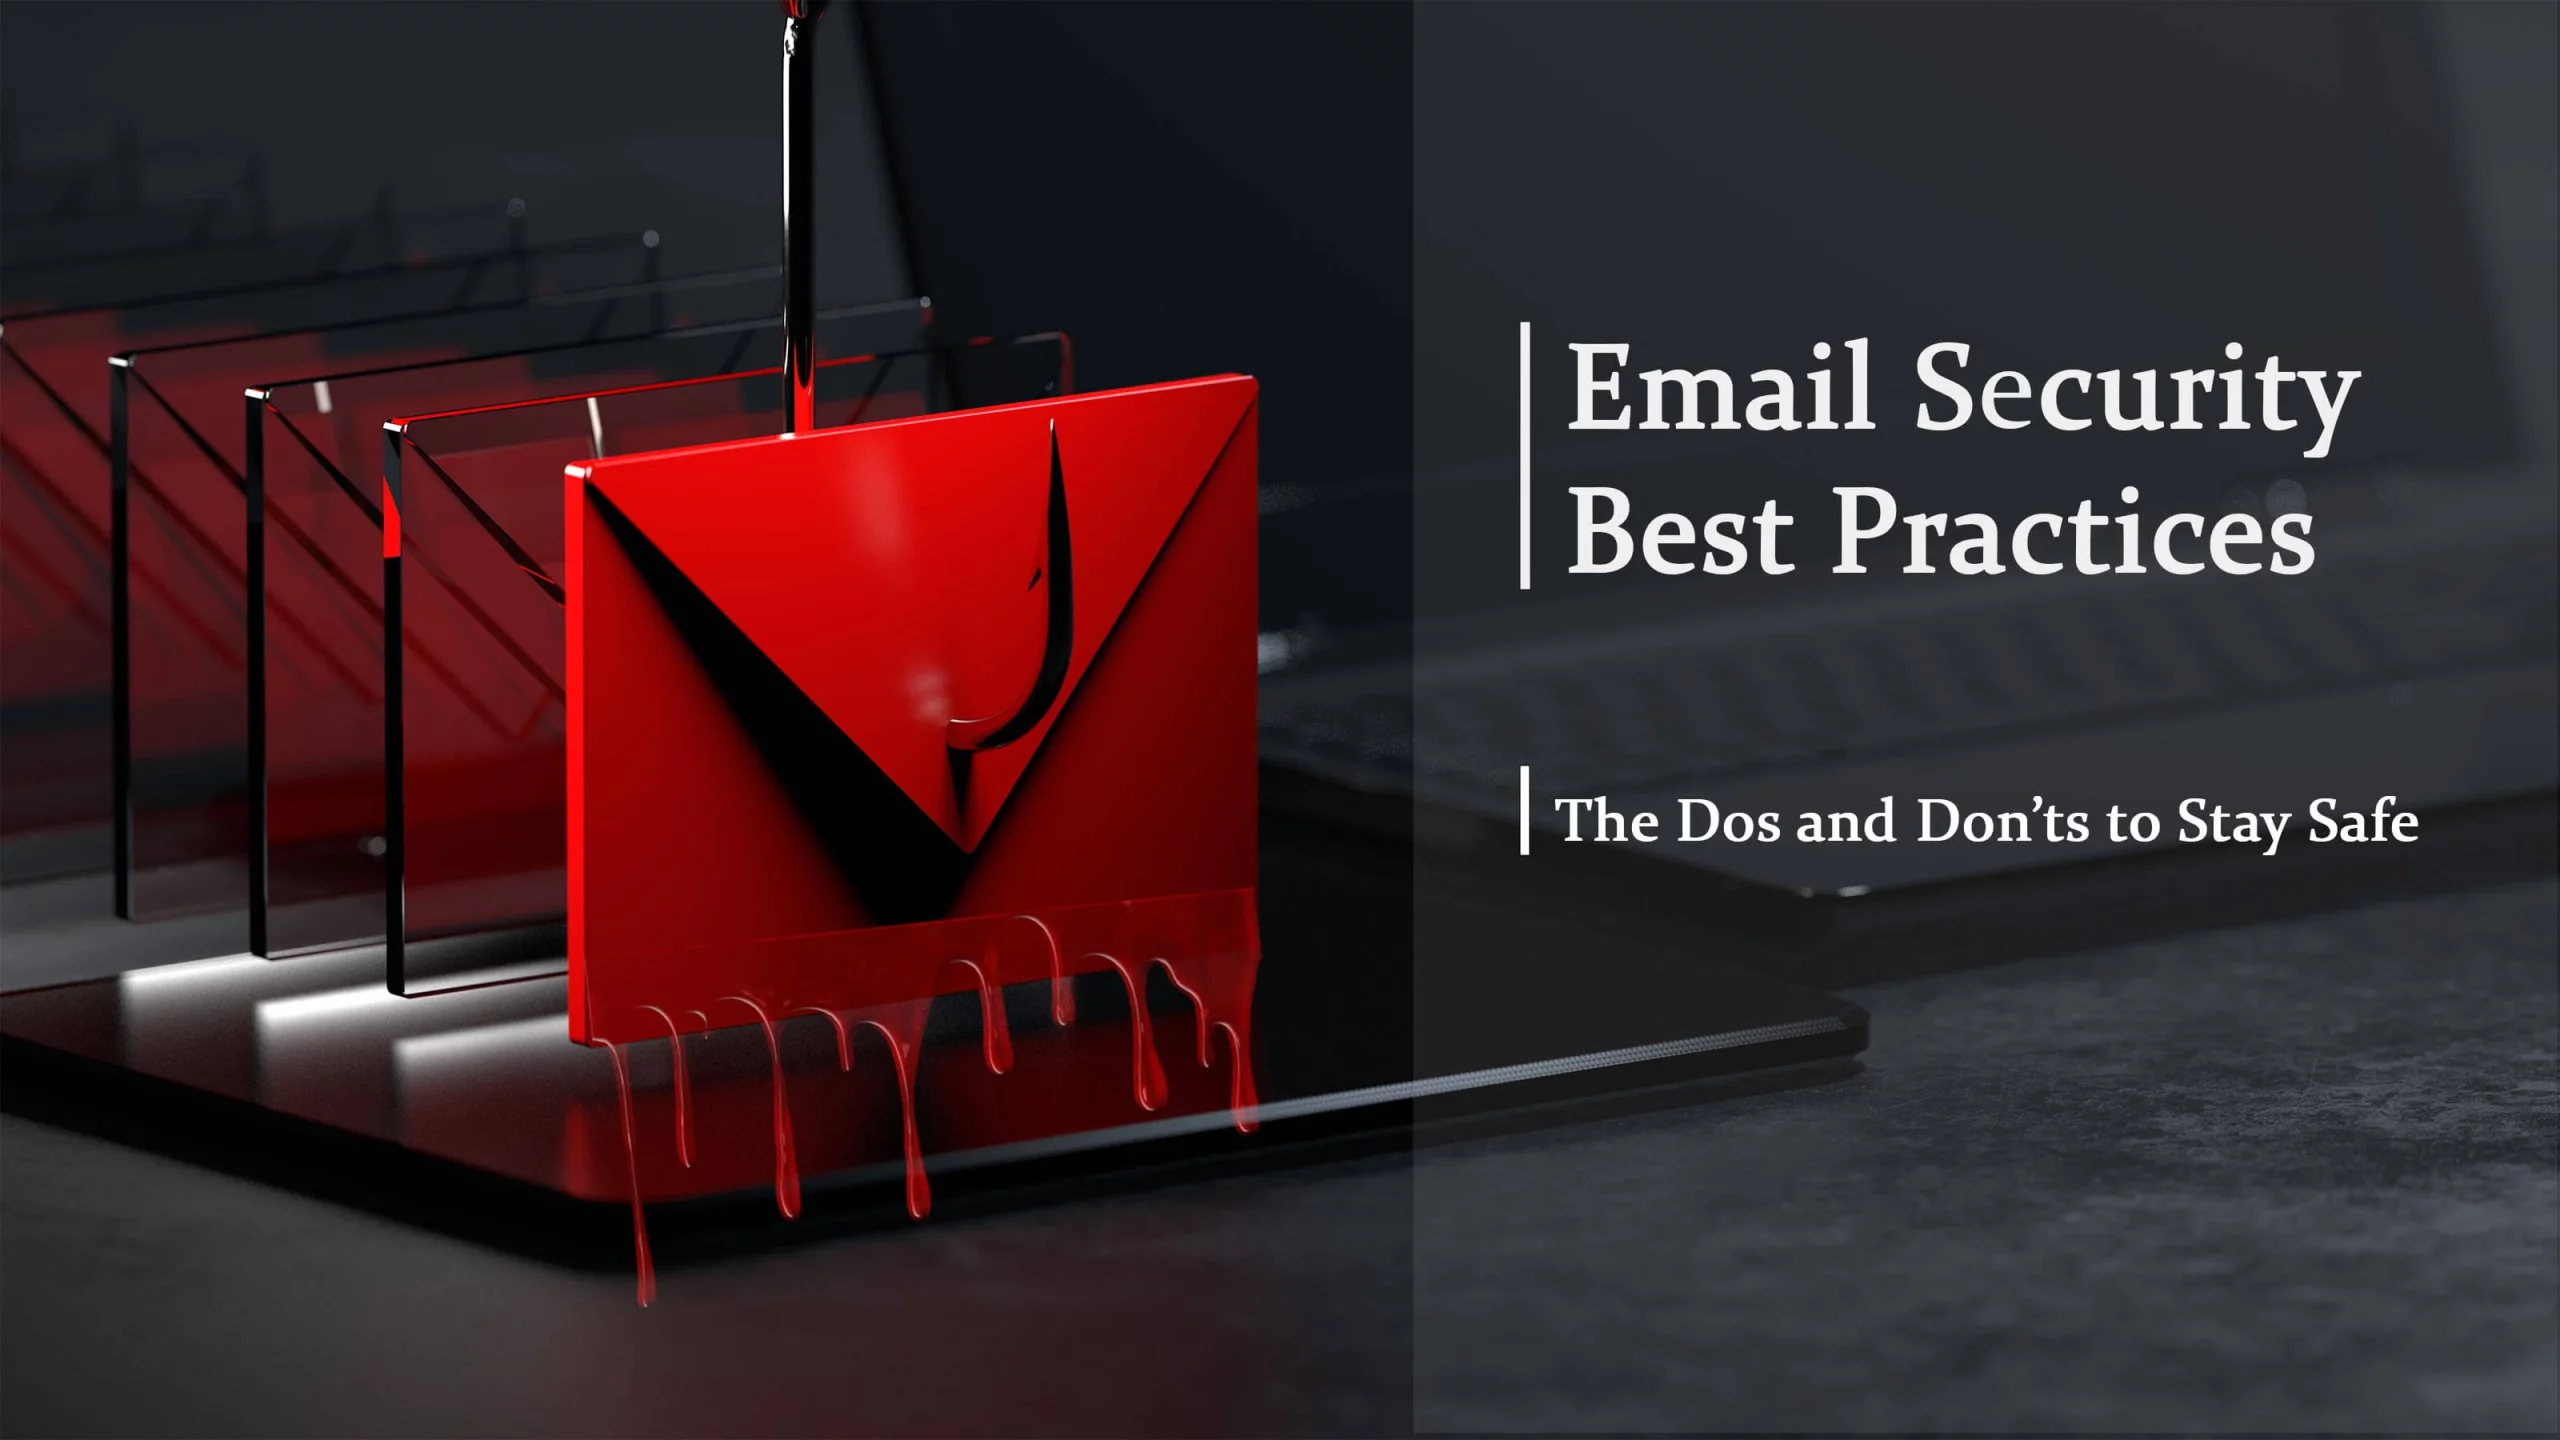 Email Security Measures Cyber Crooks Don’t Want You to Know!